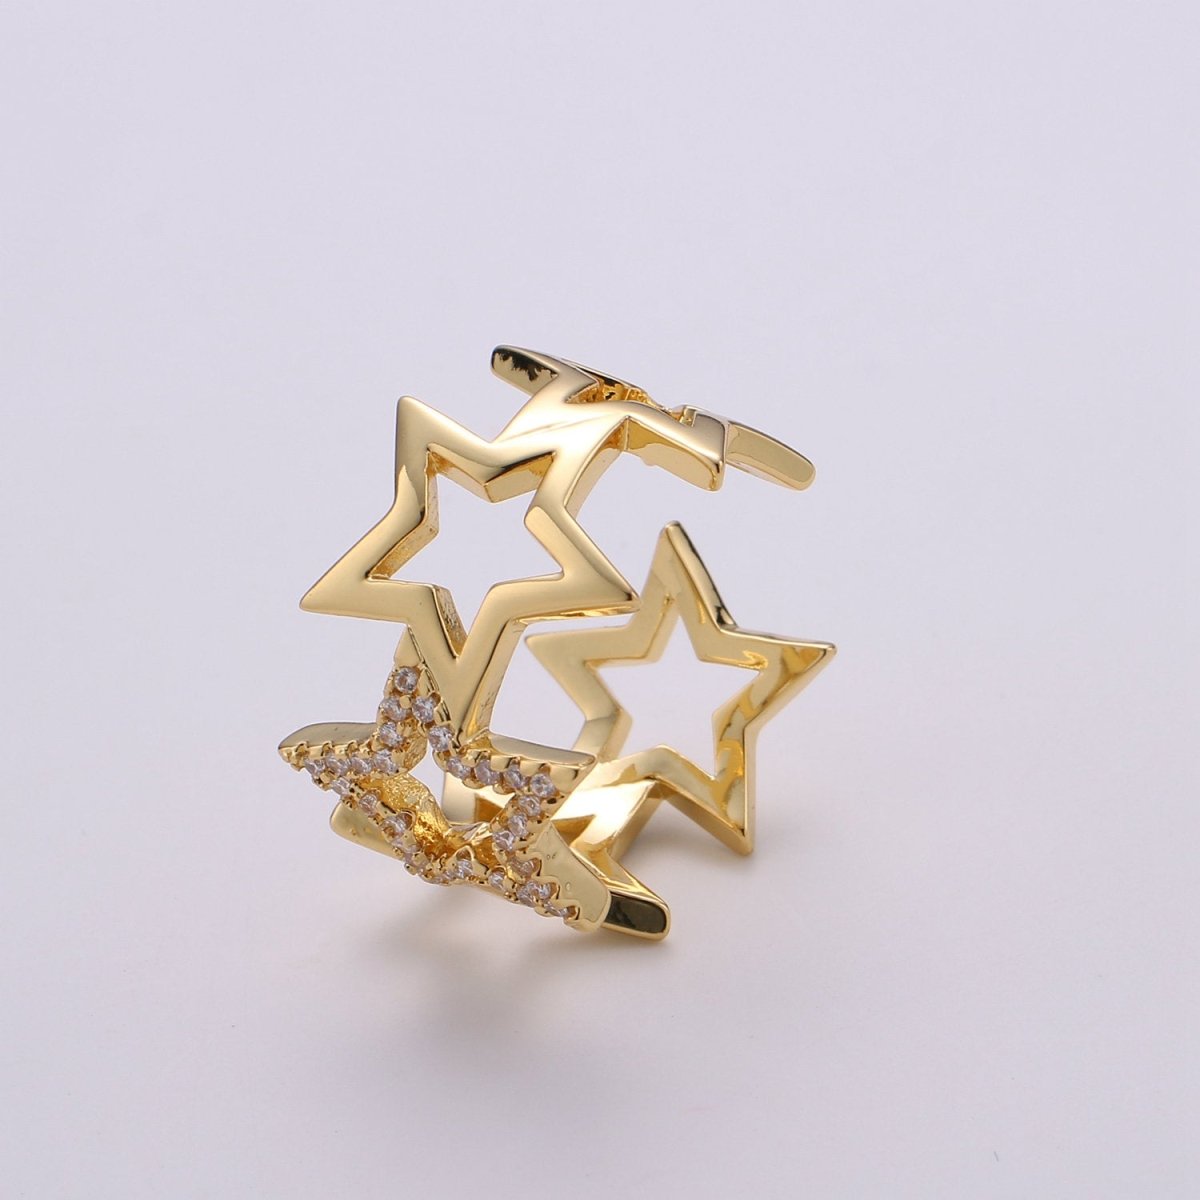 Gold Star Ring, Dainty Star Ring, Adjustable Ring, Minimalist Star Ring, Minimalist Ring, Gold Open Ring, Celestial Jewelry R-090 - DLUXCA